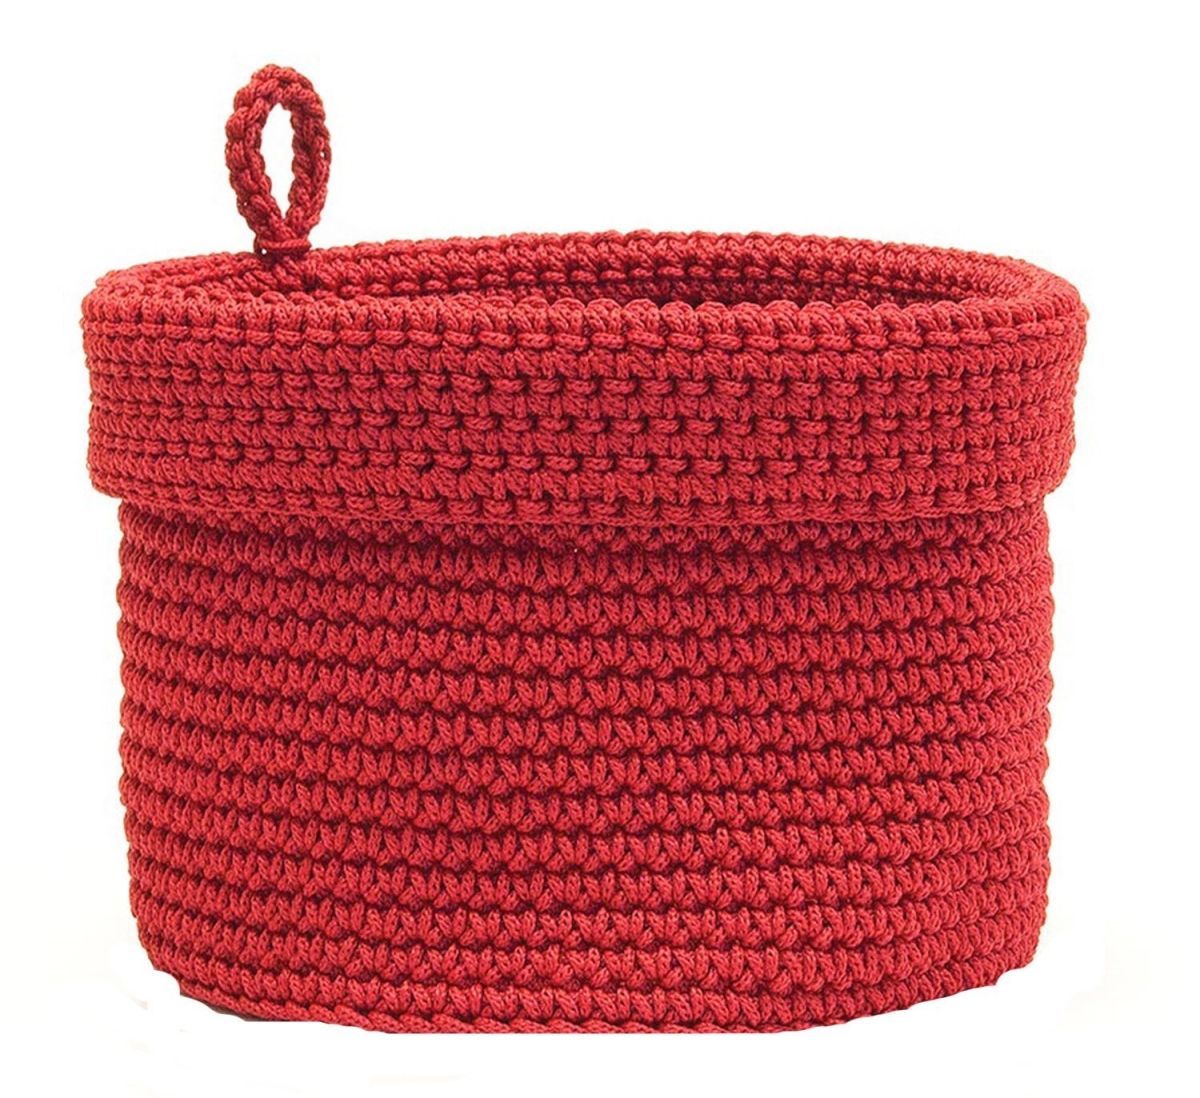 Mc-1040rr 10 X 10 In. Mode Crochet Basket With Loop, Ruby Red